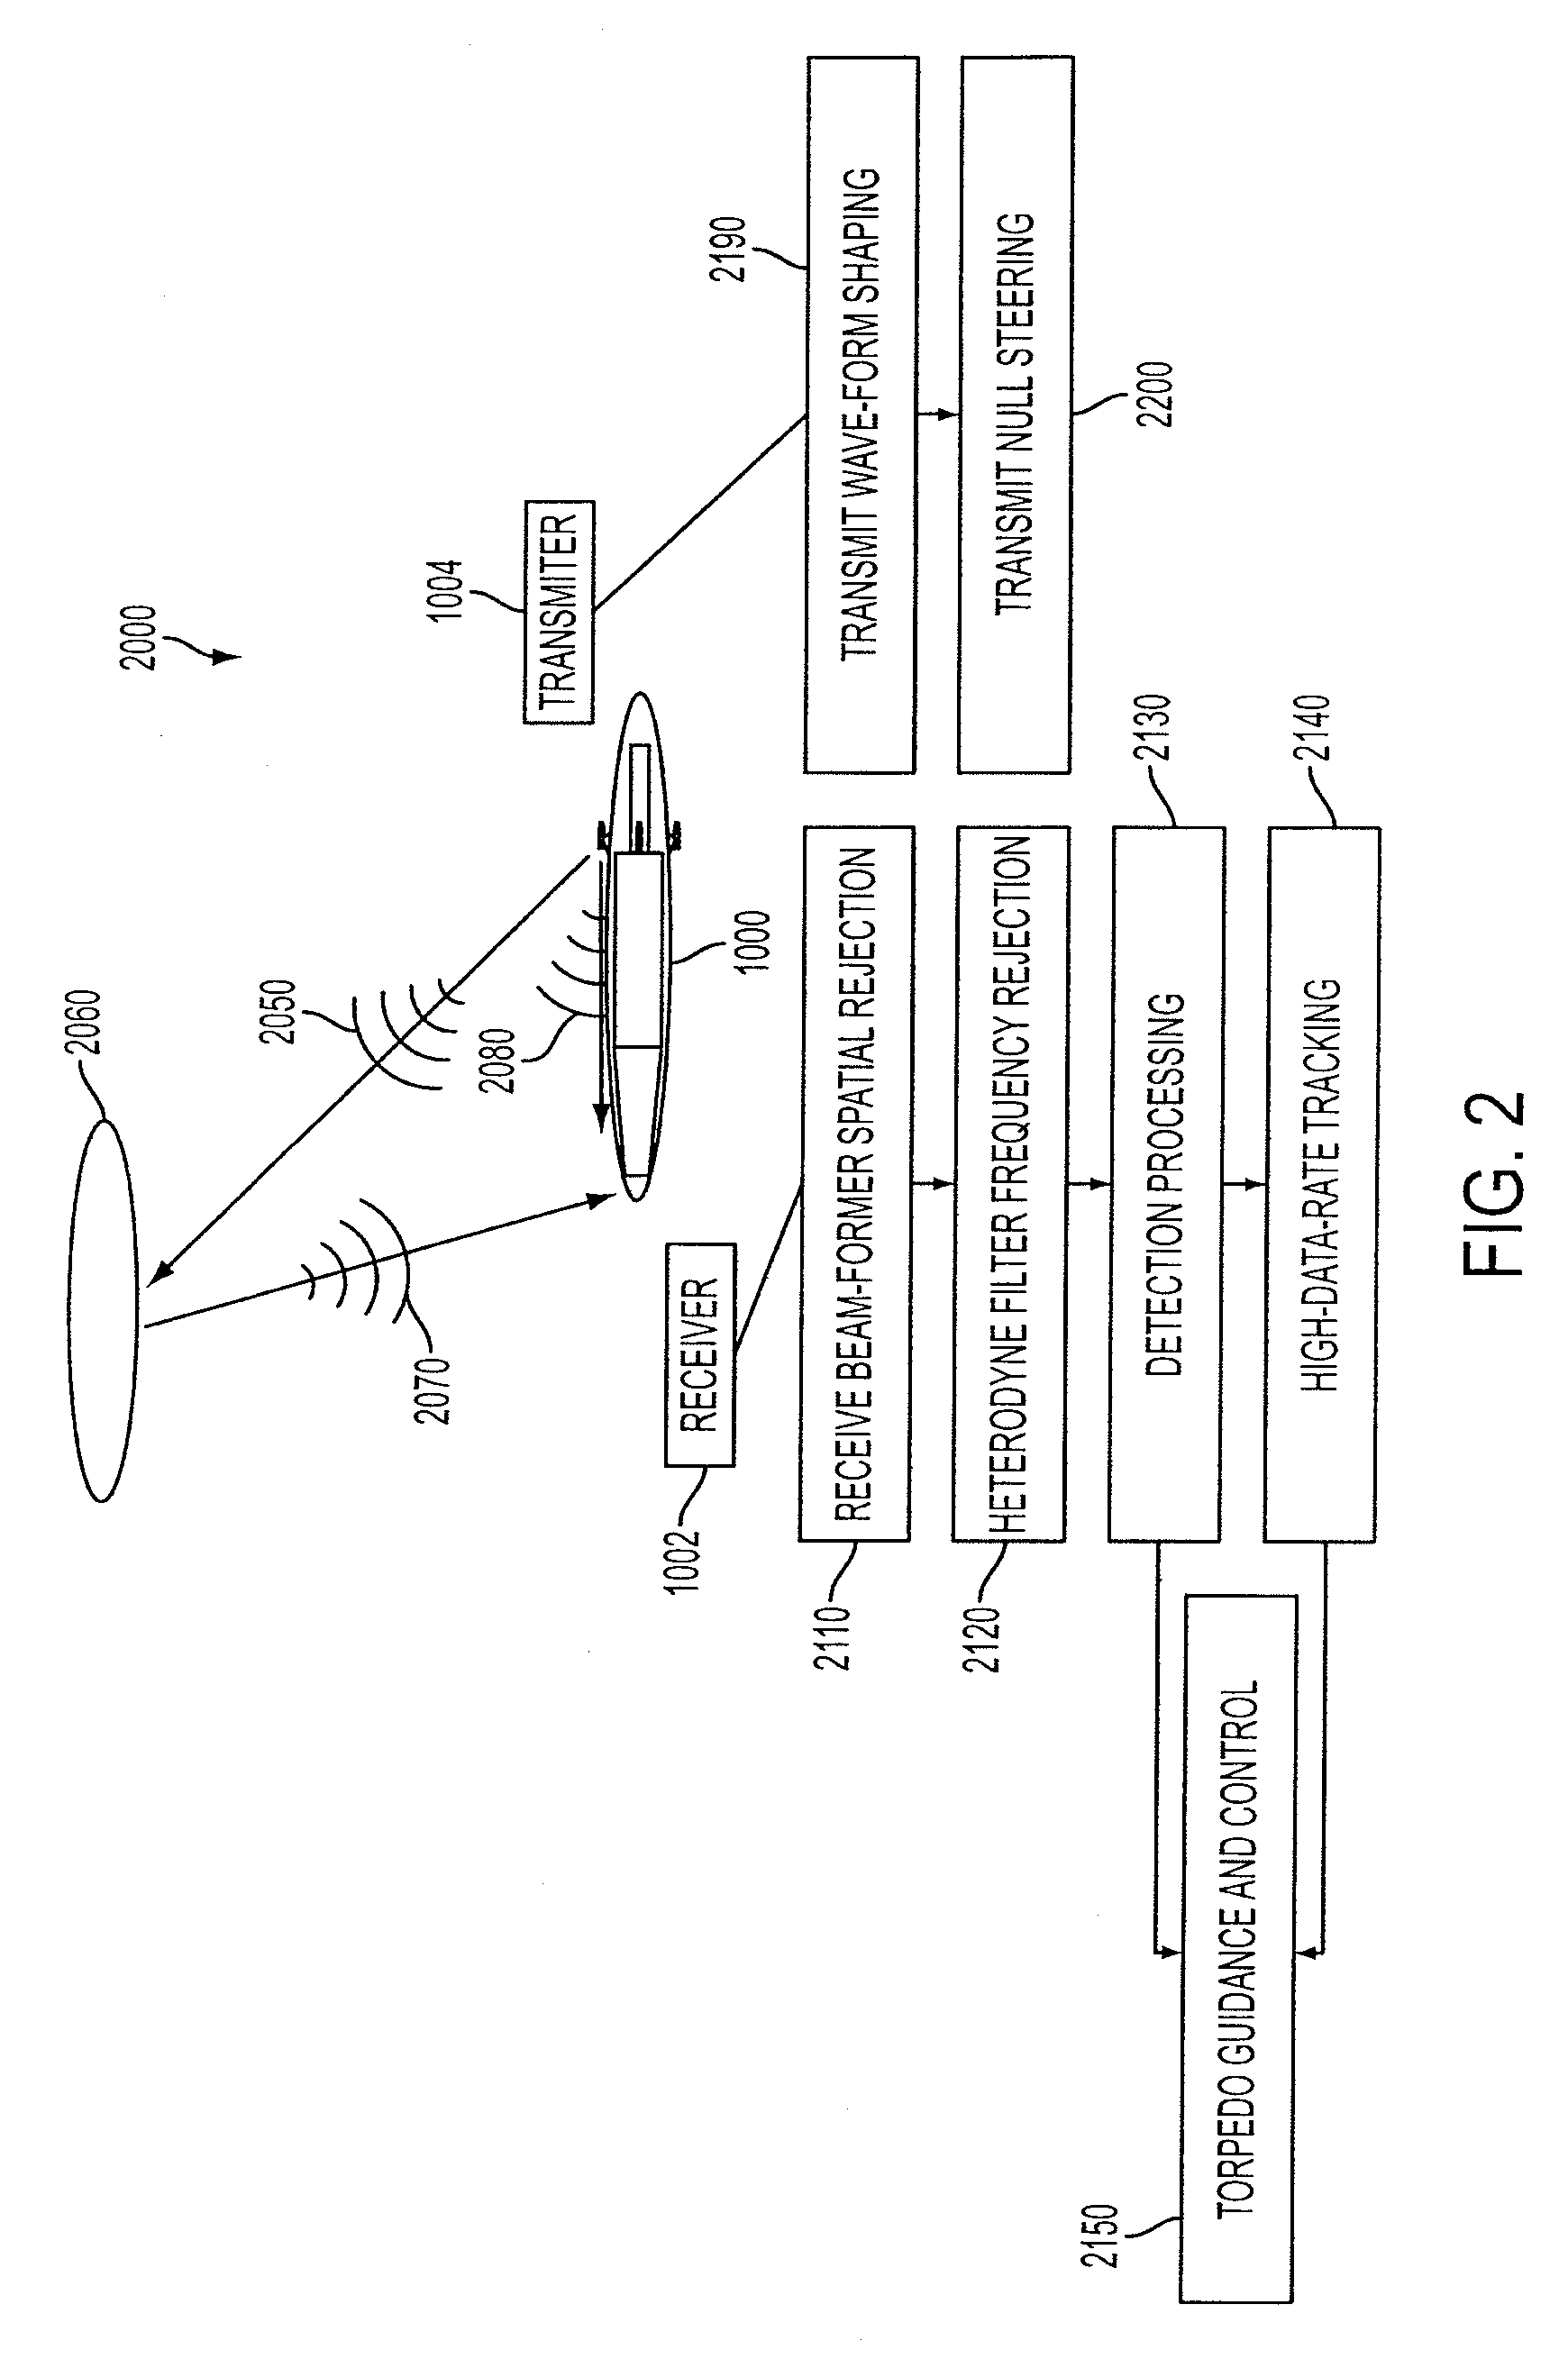 Cavitating Body Sonar System and Process